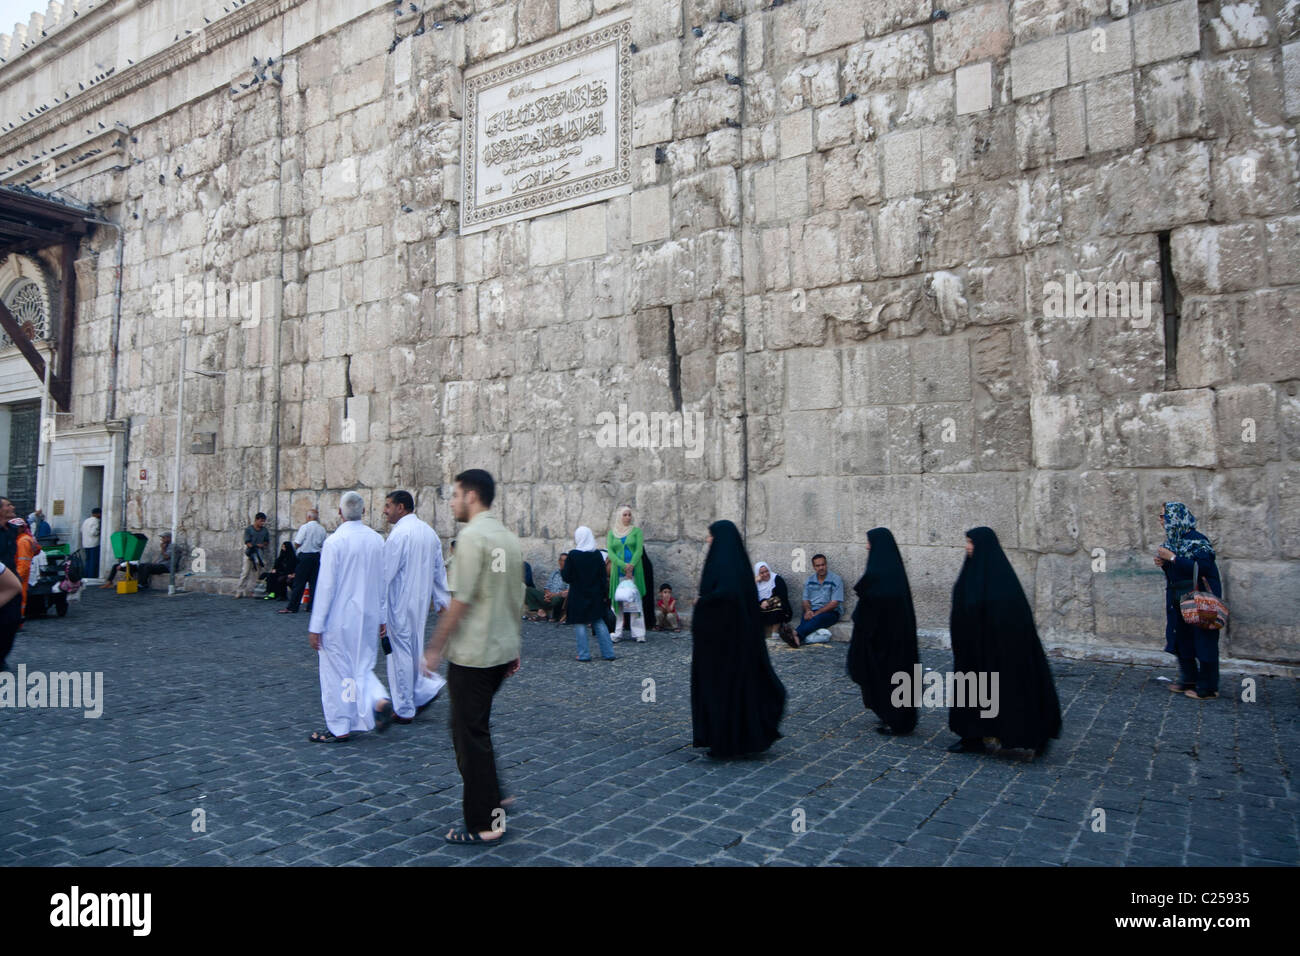 Outside the The Umayyad Mosque, also known as the Great Mosque of Damascus. Image taken in July 2010. Stock Photo